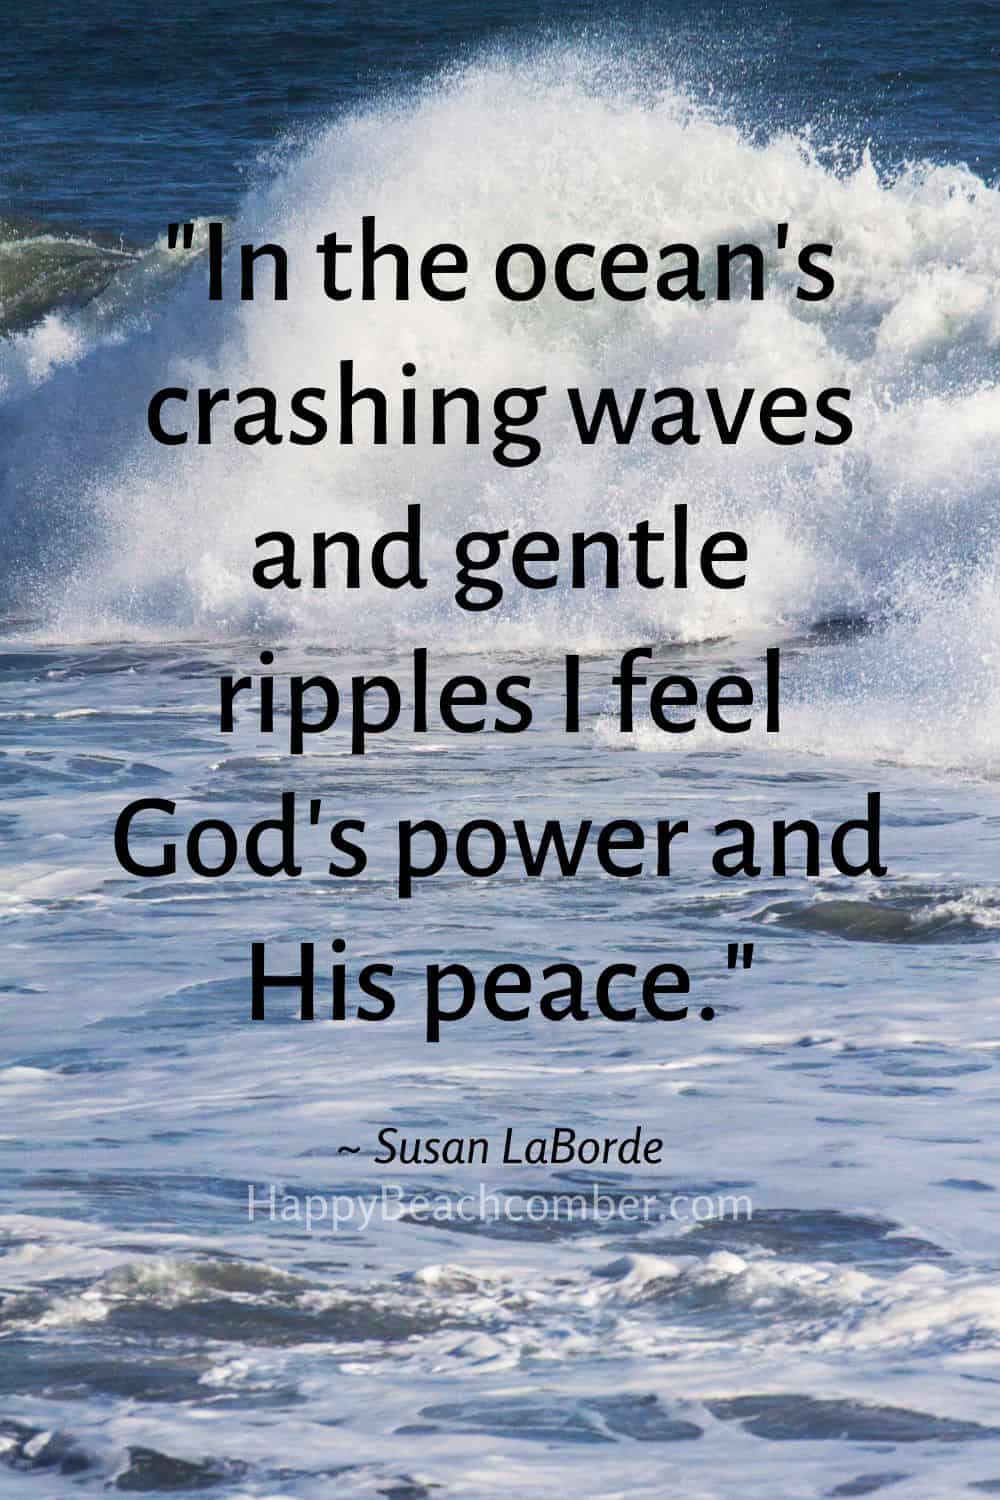 In the ocean's crashing waves and gentle ripples I feel...